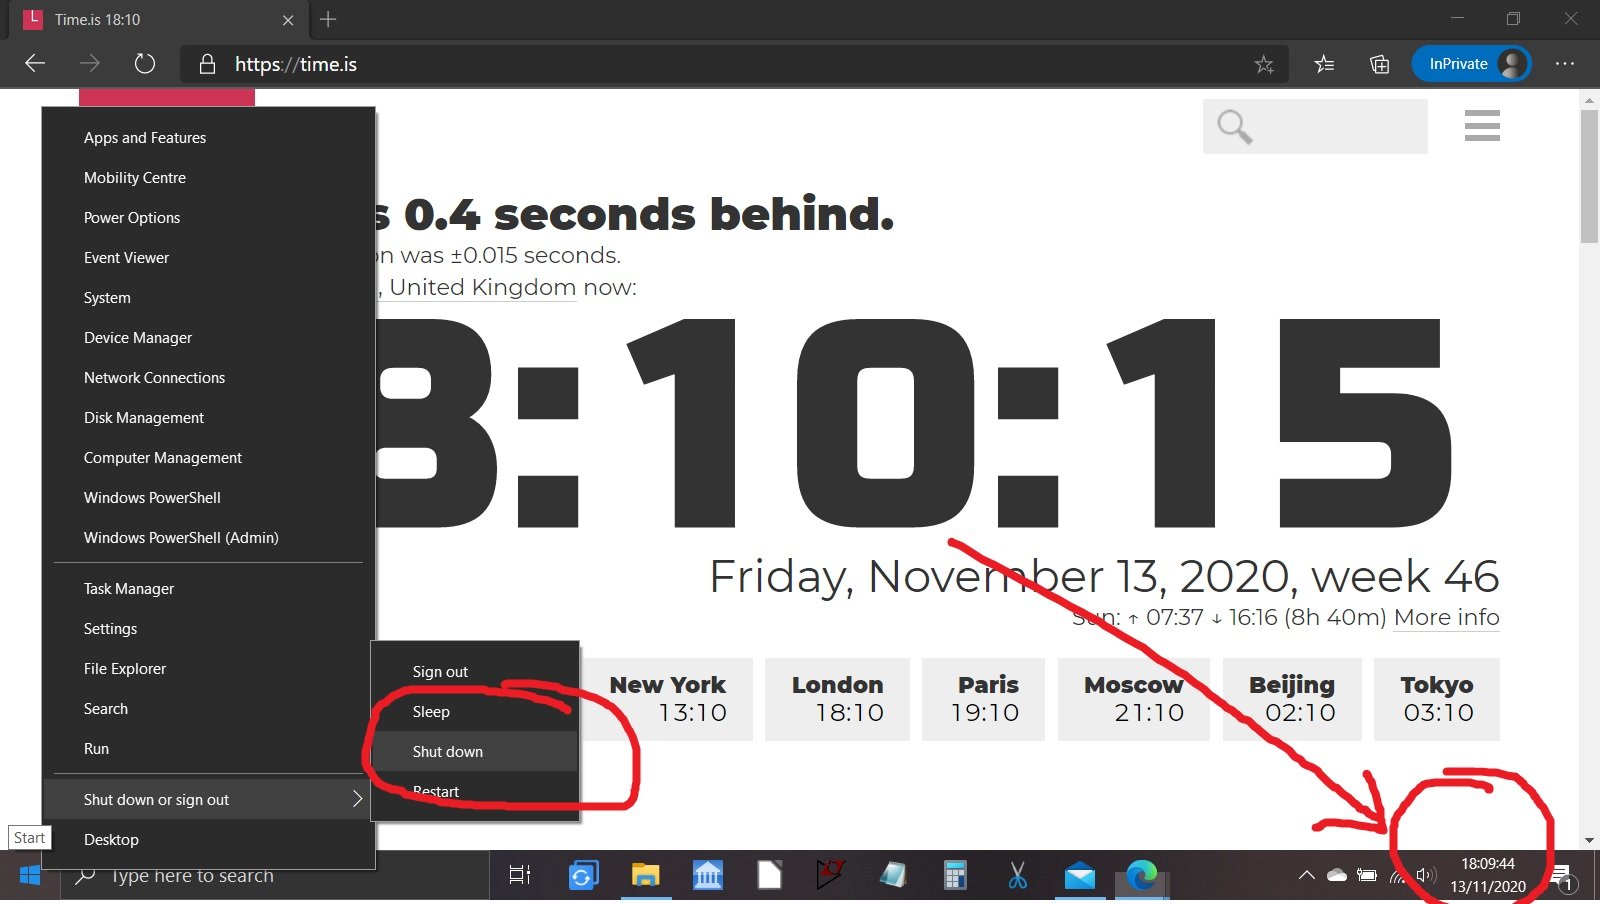 How To Show Or Hide The Clock In Windows 10 Taskbar Youtube Images